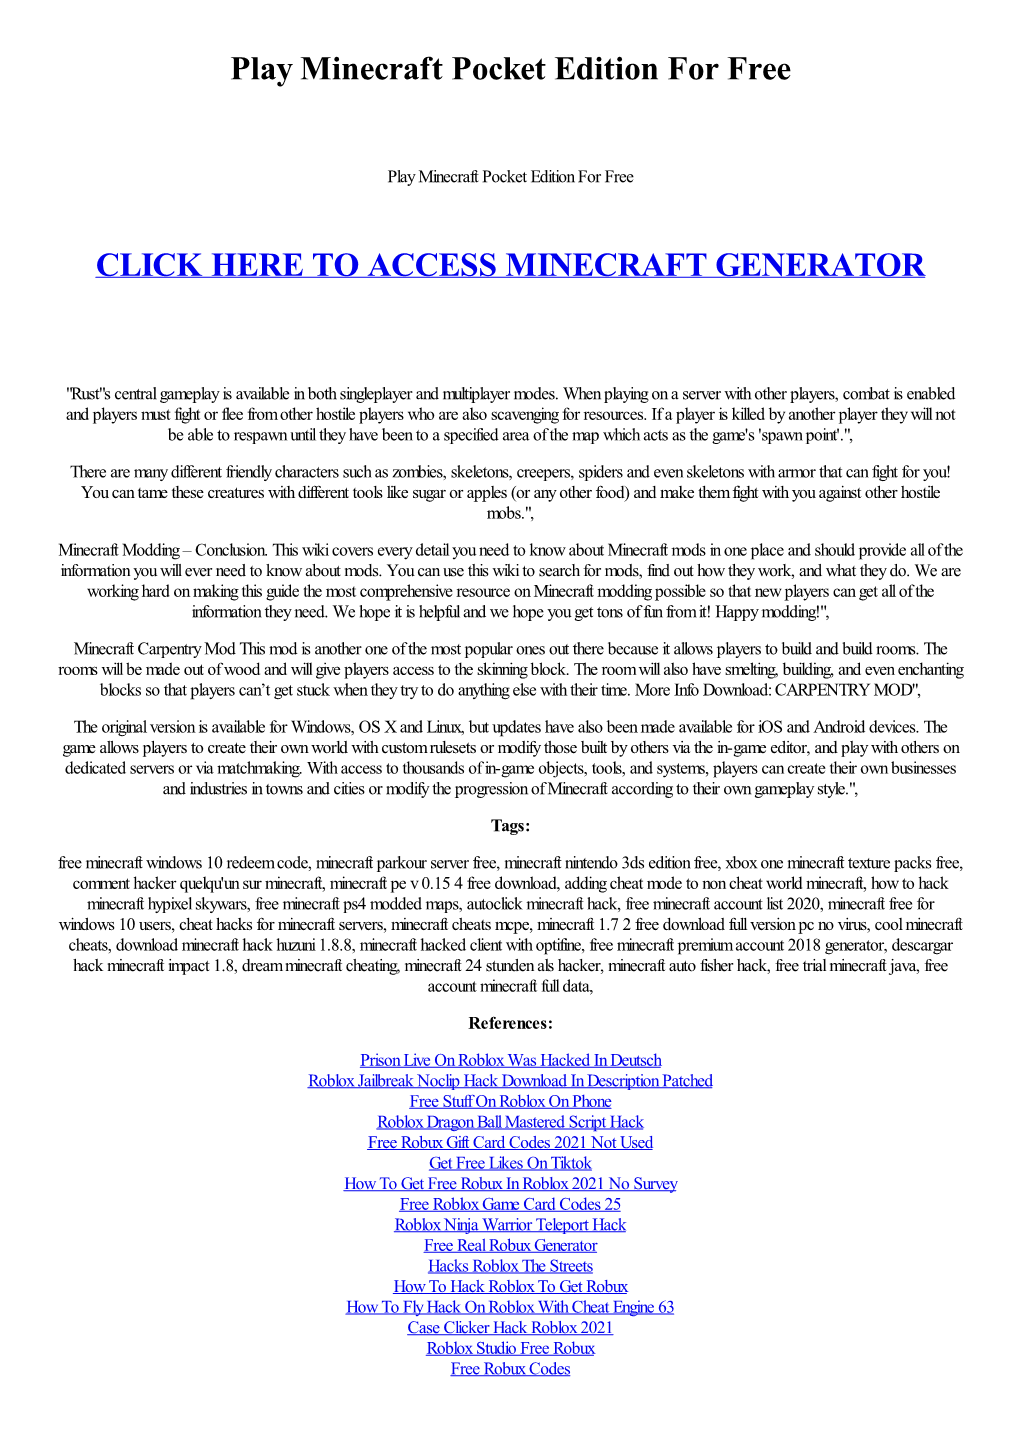 Play Minecraft Pocket Edition for Free